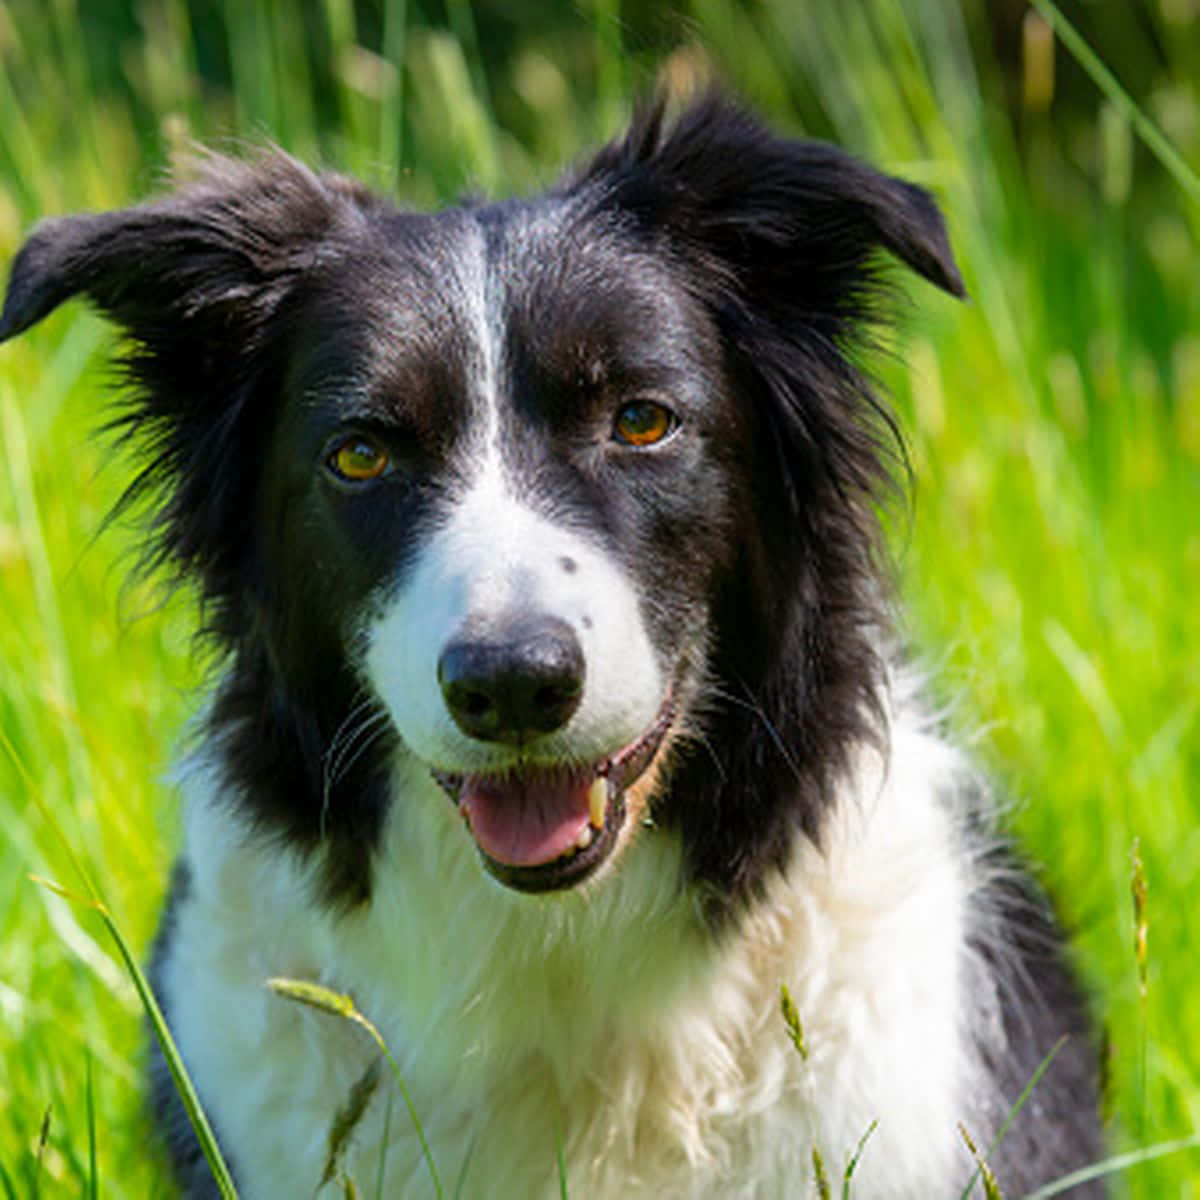 A beautiful border collie looks up and out of frame